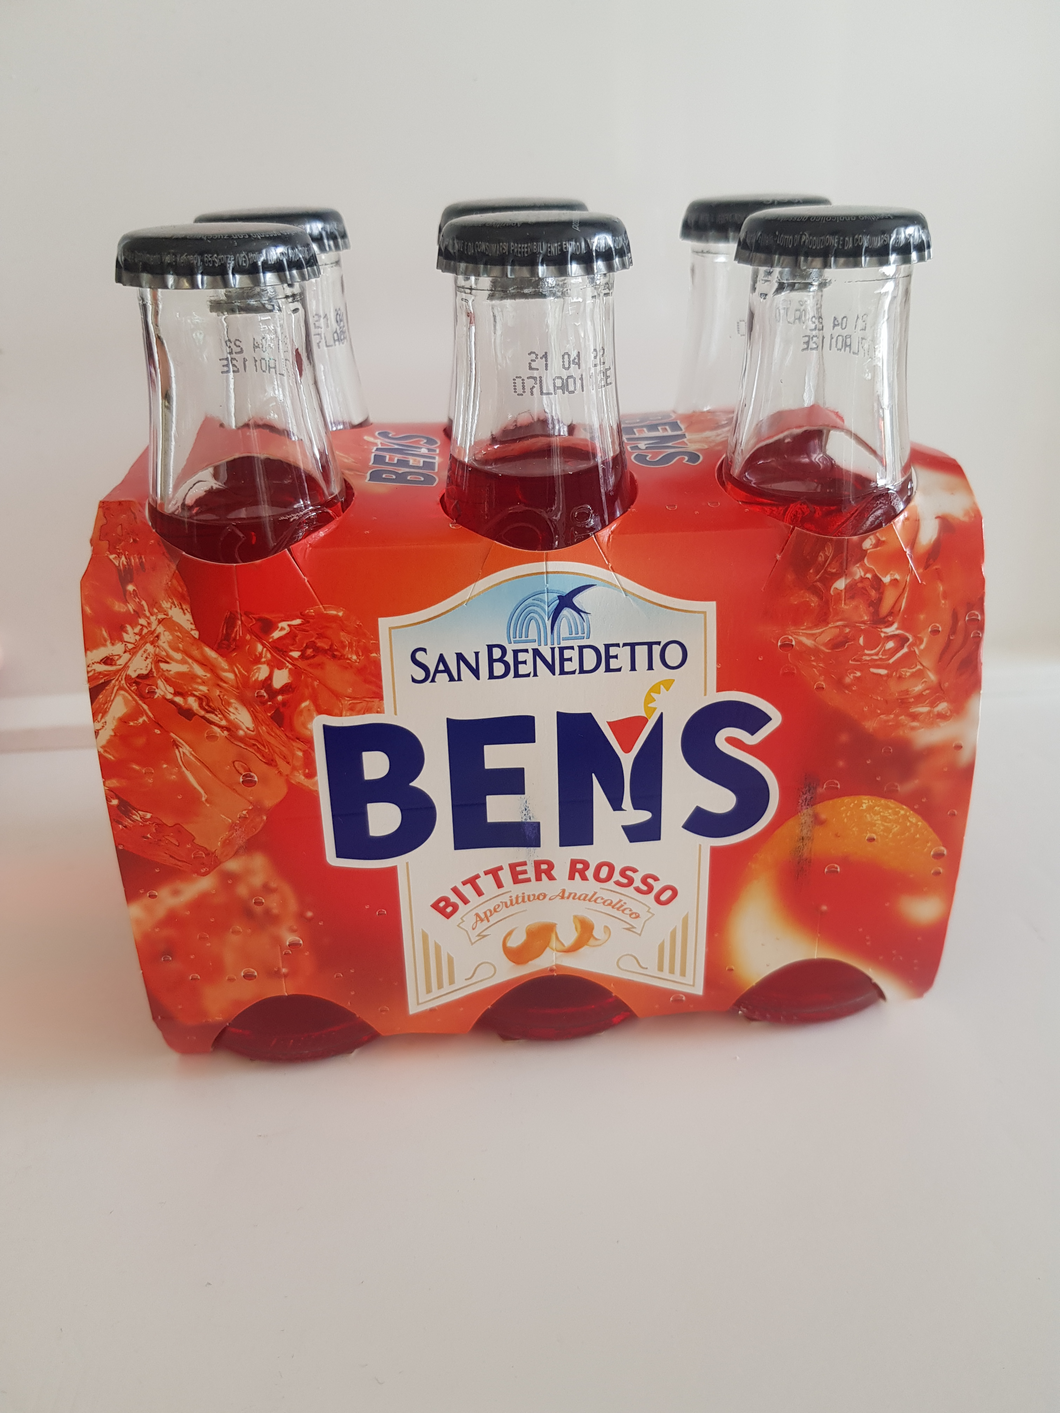 Sanbenedetto - Bens Bitter Rosso